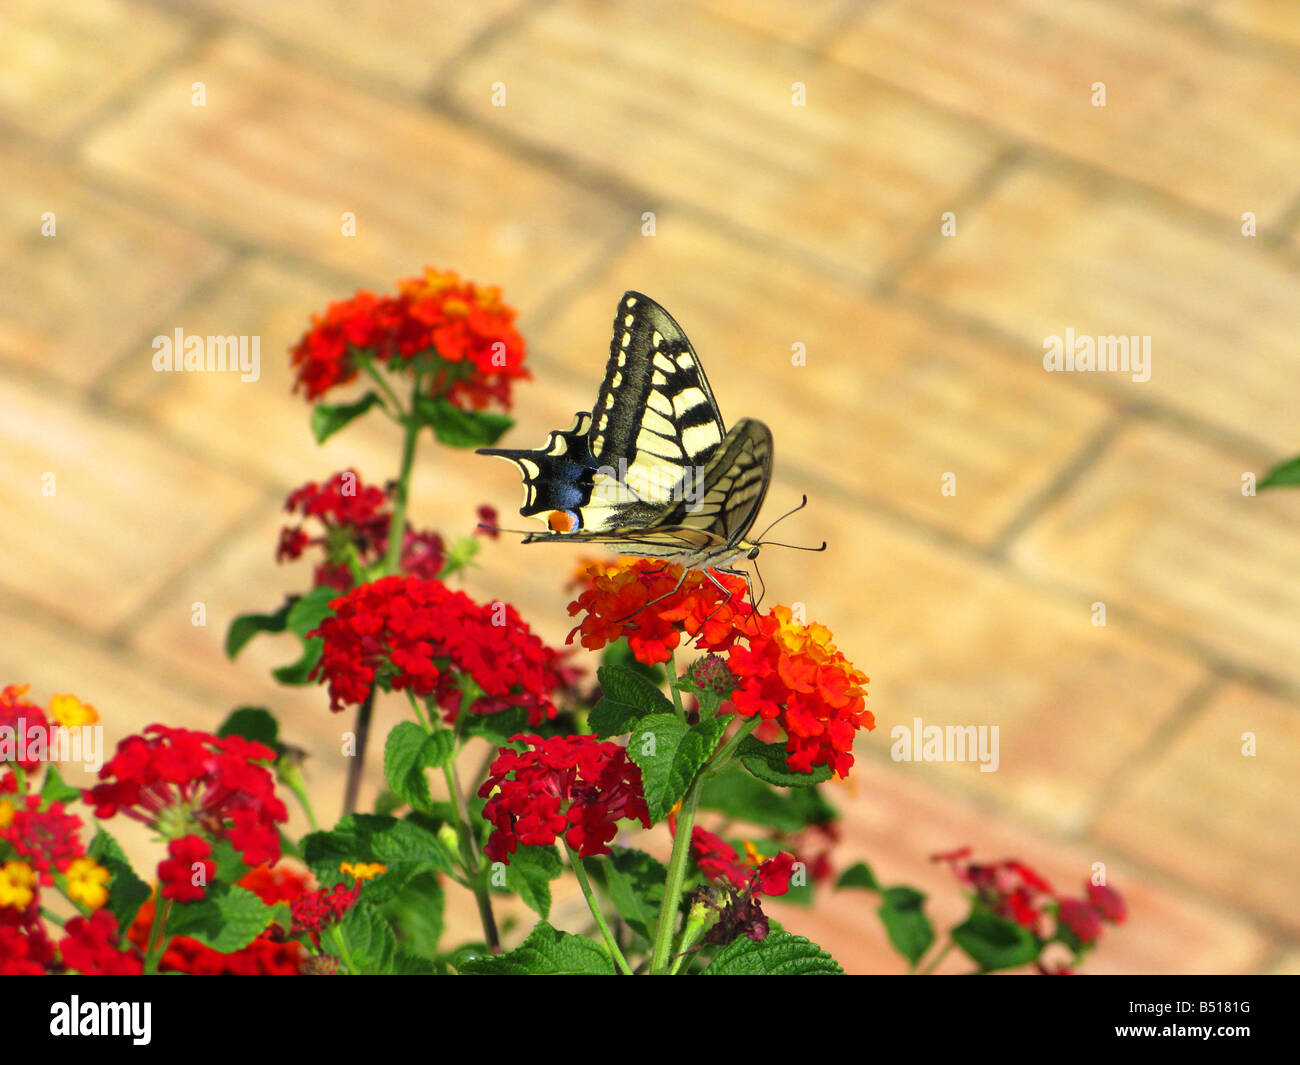 Swallowtail butterflies are large, colorful butterflies which form the family Papilionidae. Stock Photo